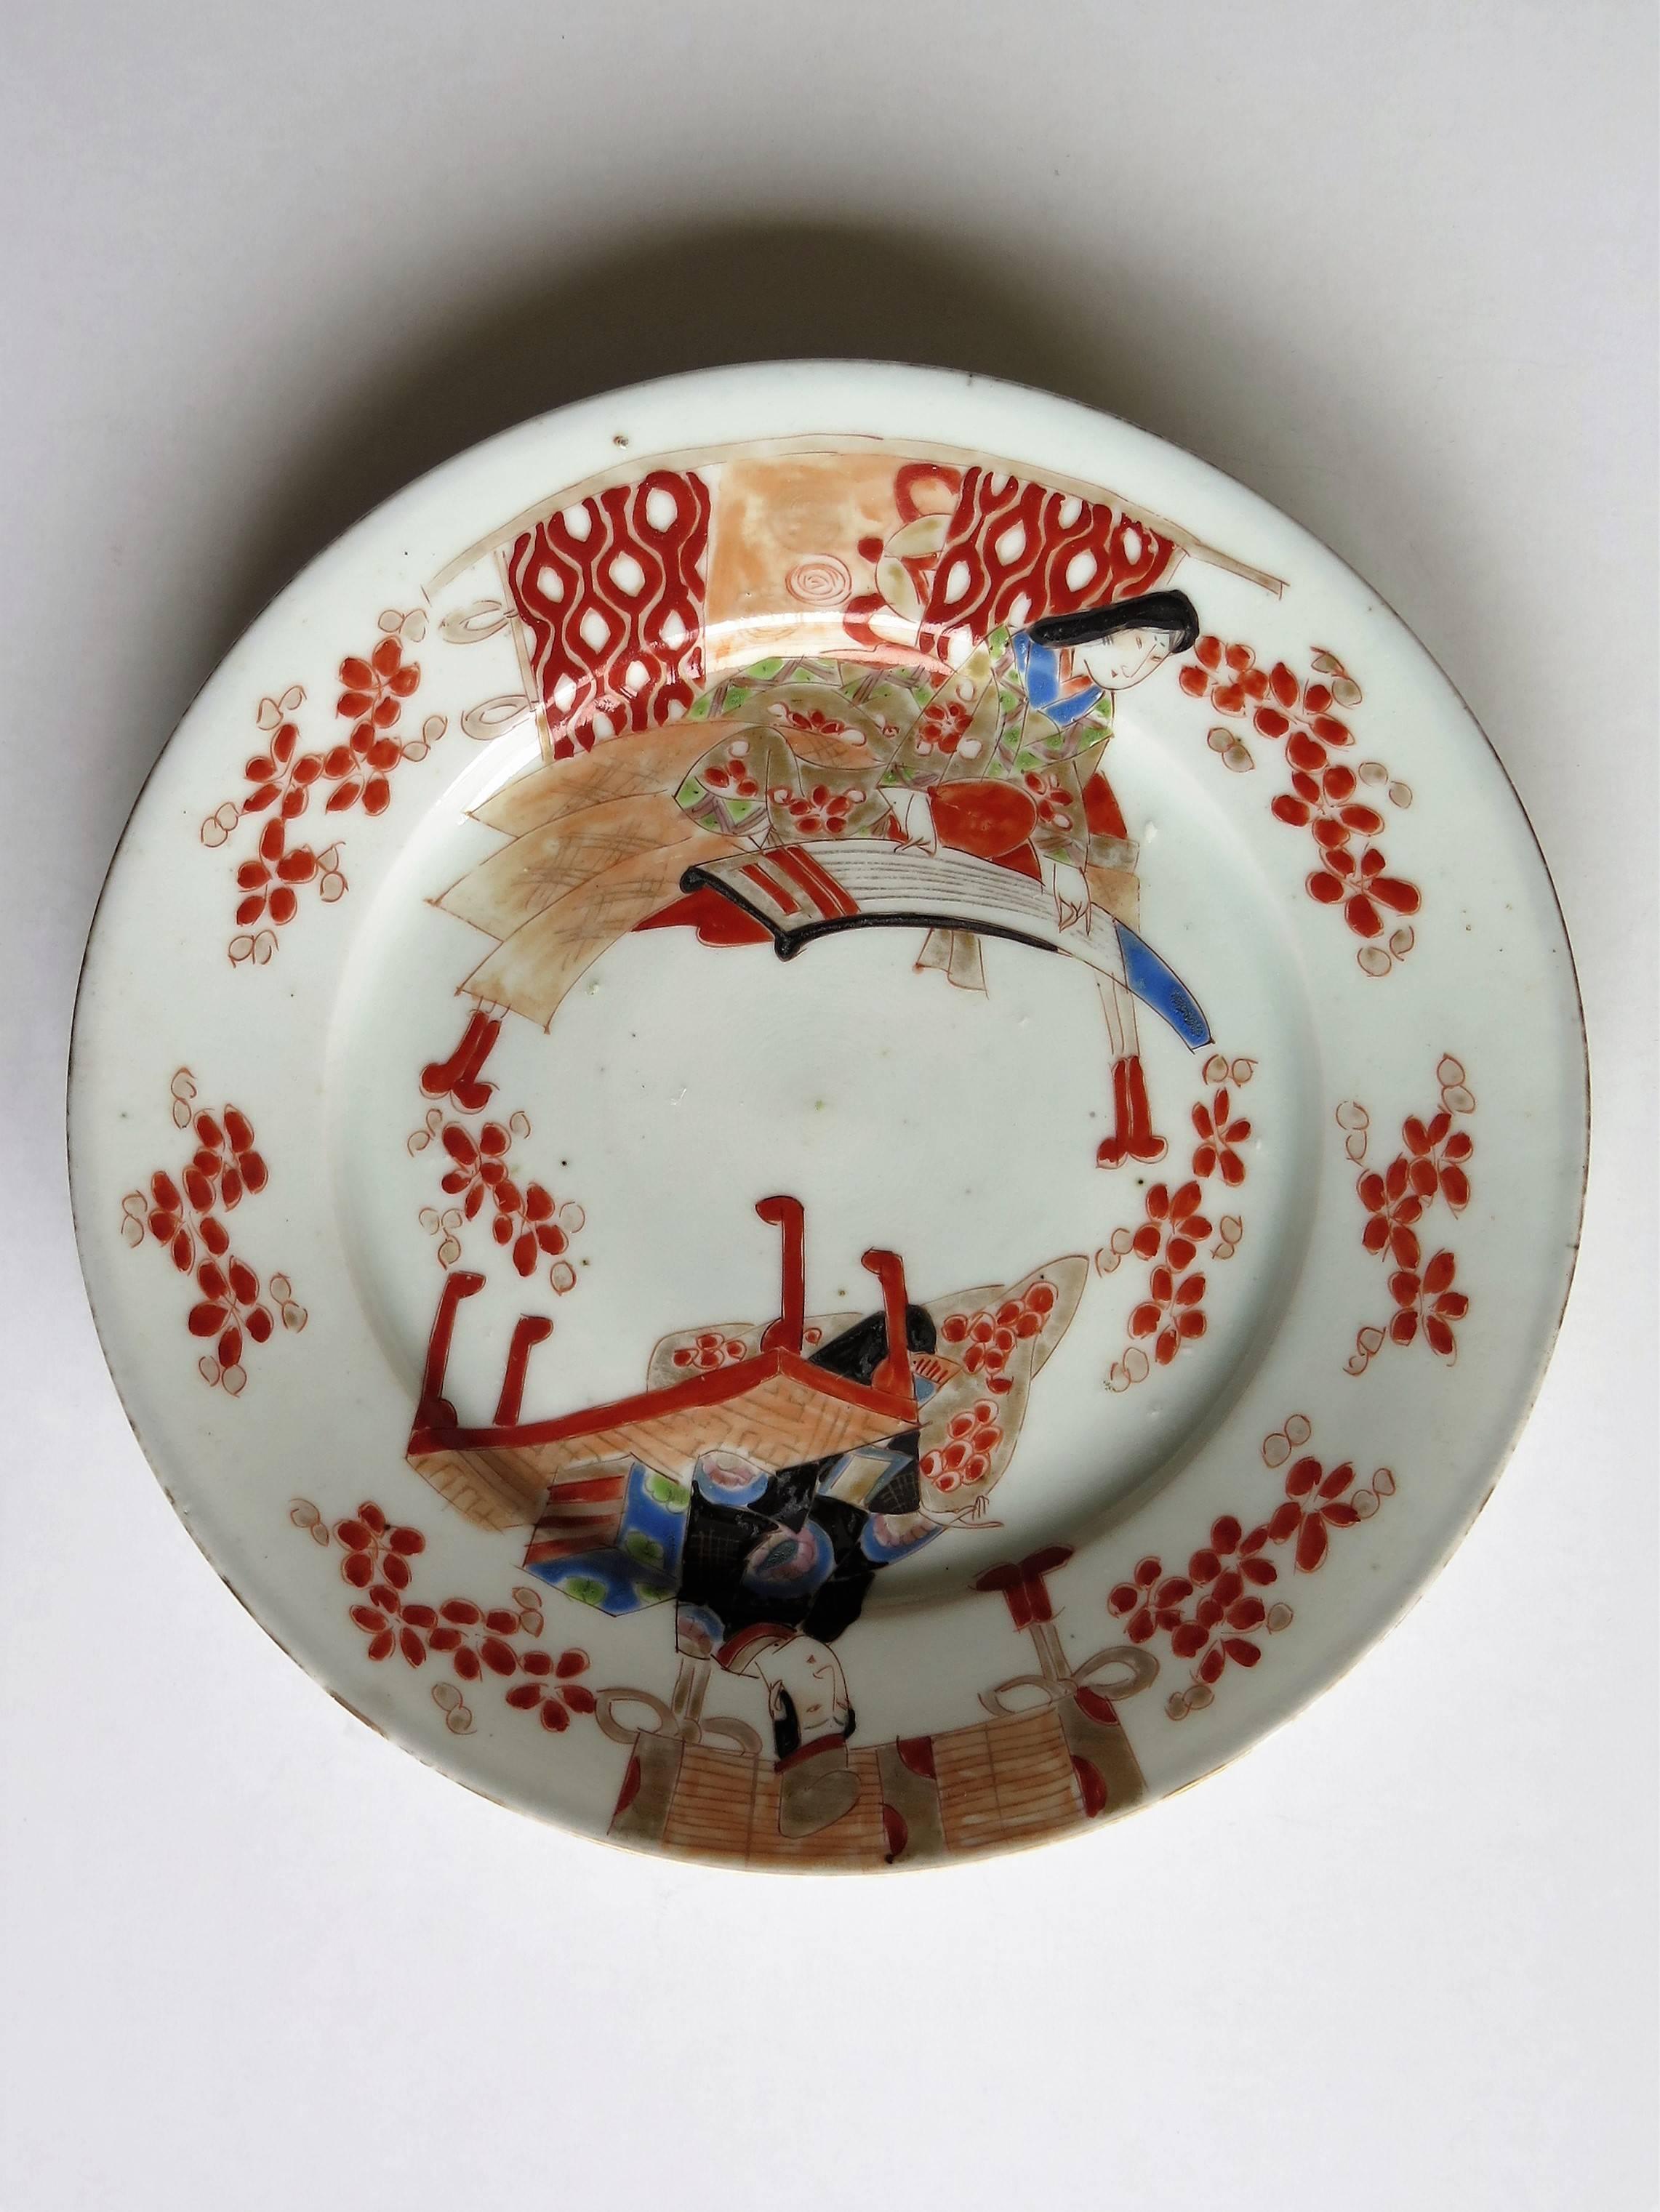 19th Century Japanese Porcelain Dish or Plate Hand-Painted Man and Woman, Meiji Period